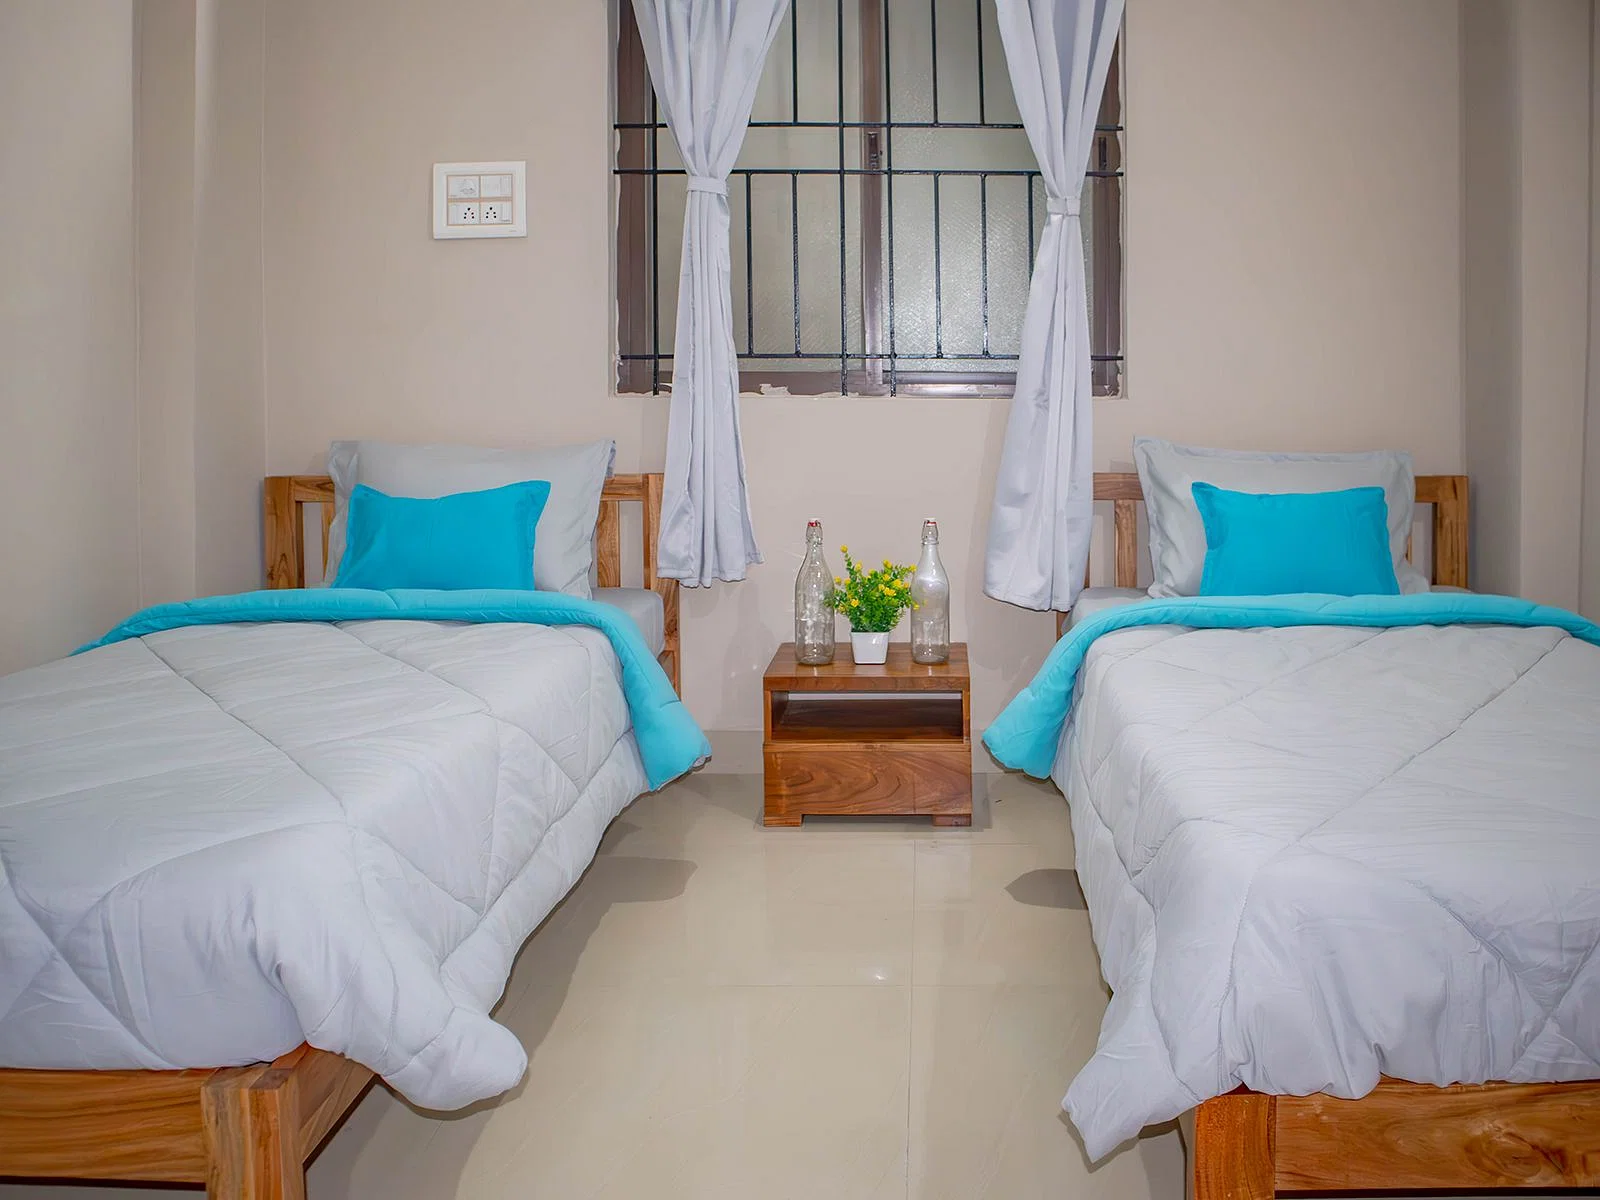 budget-friendly PGs and hostels for couple with single rooms with daily hopusekeeping-Zolo Tejas